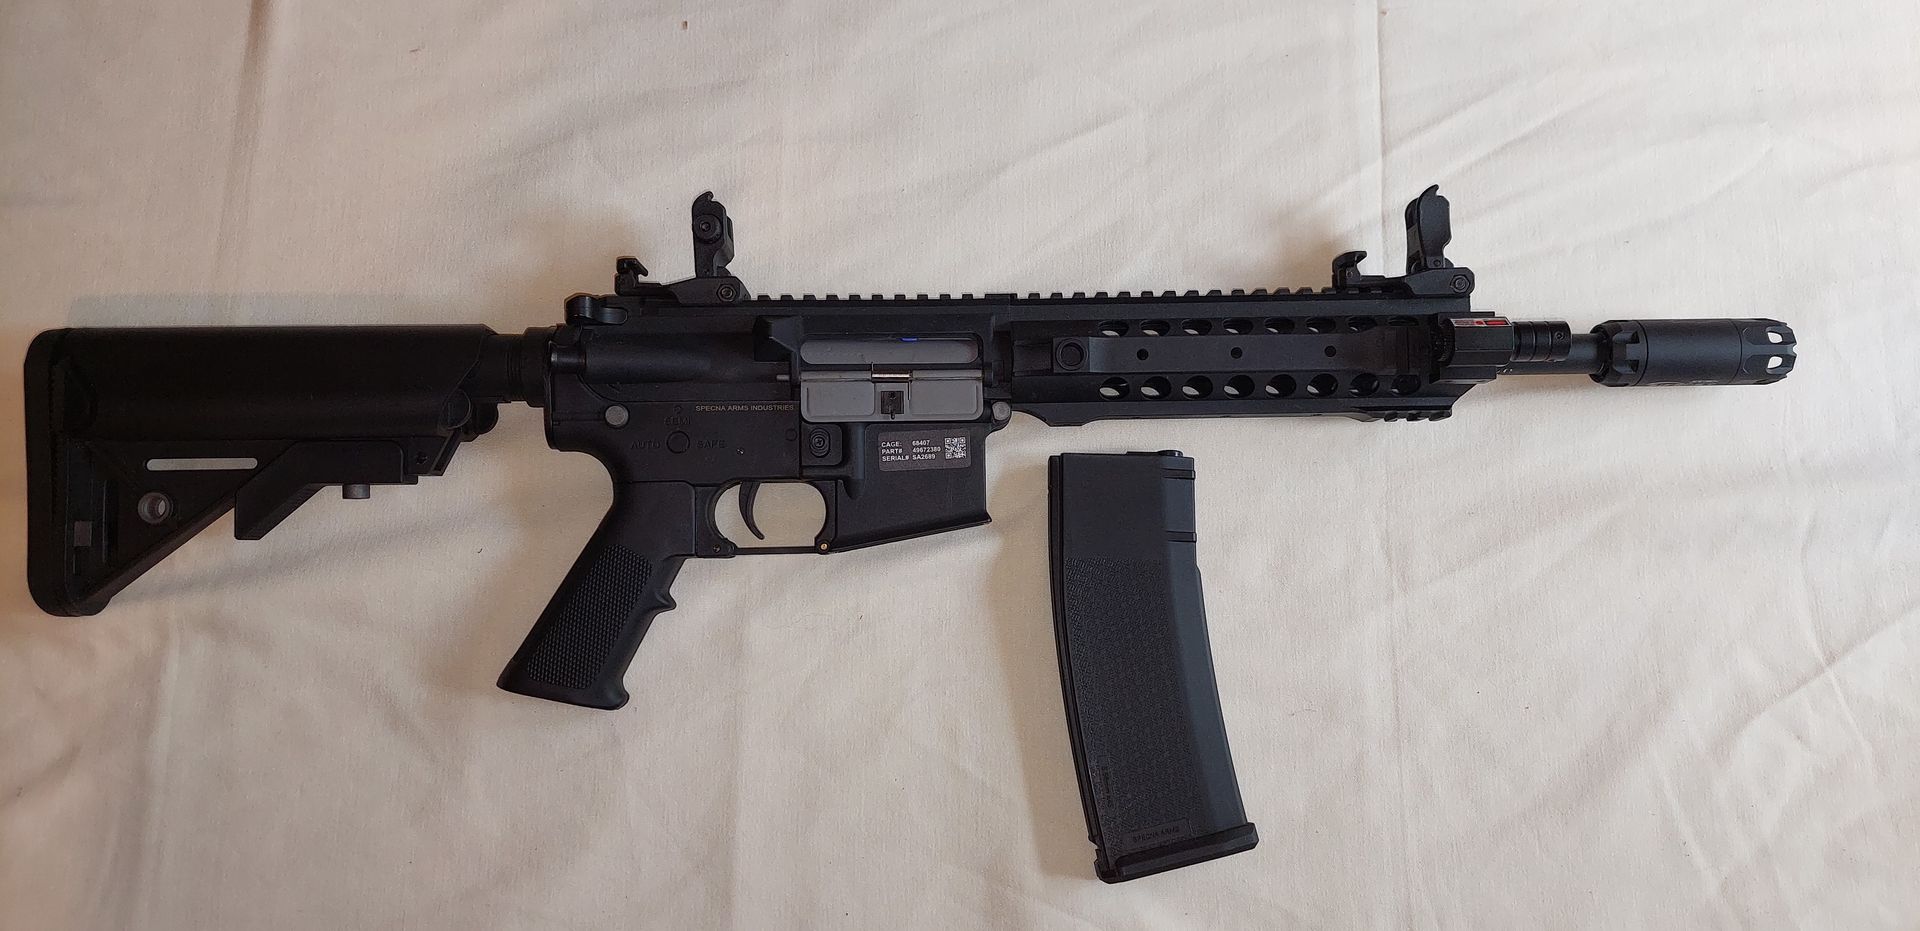 (22) AR15 With extendible Stock & Flip up sites front & rear